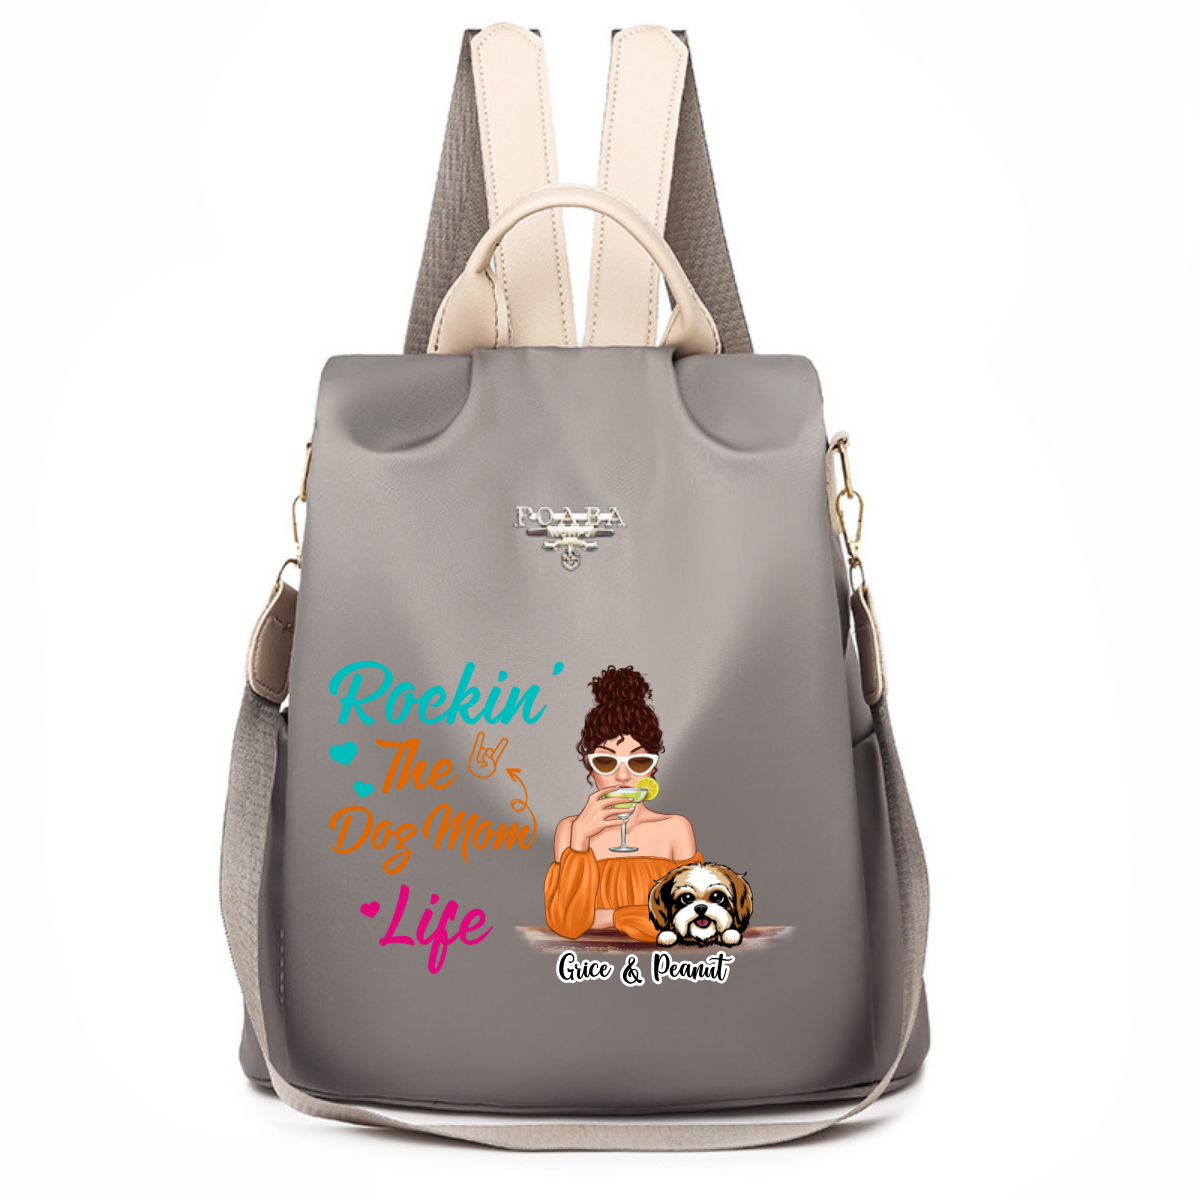 Rockin‘ Dog Mom Life Colorful Pattern Personalized Backpack